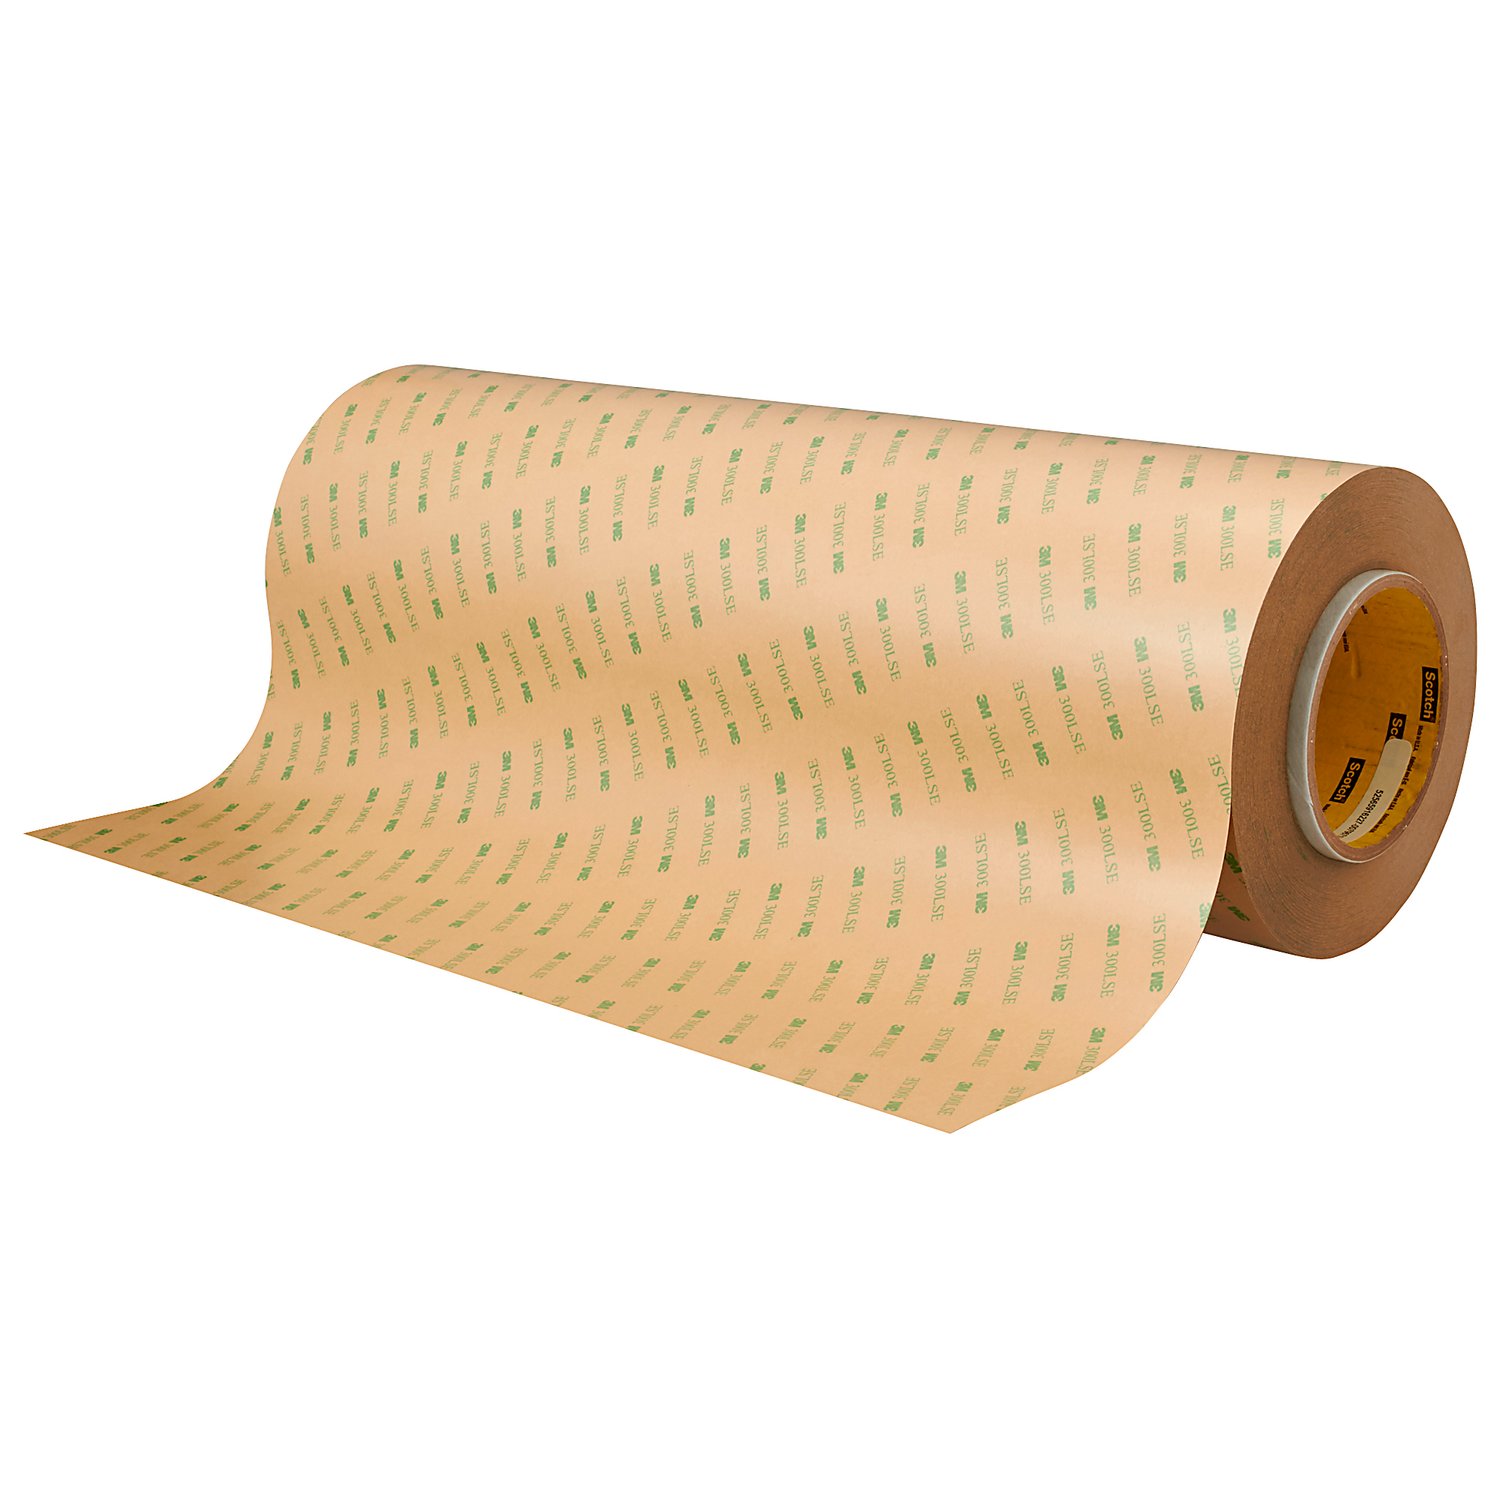 7010376127 - 3M Adhesive Transfer Tape 9671LE, Clear, 12 in x 180 yd, 2 mil, 1 roll
per case